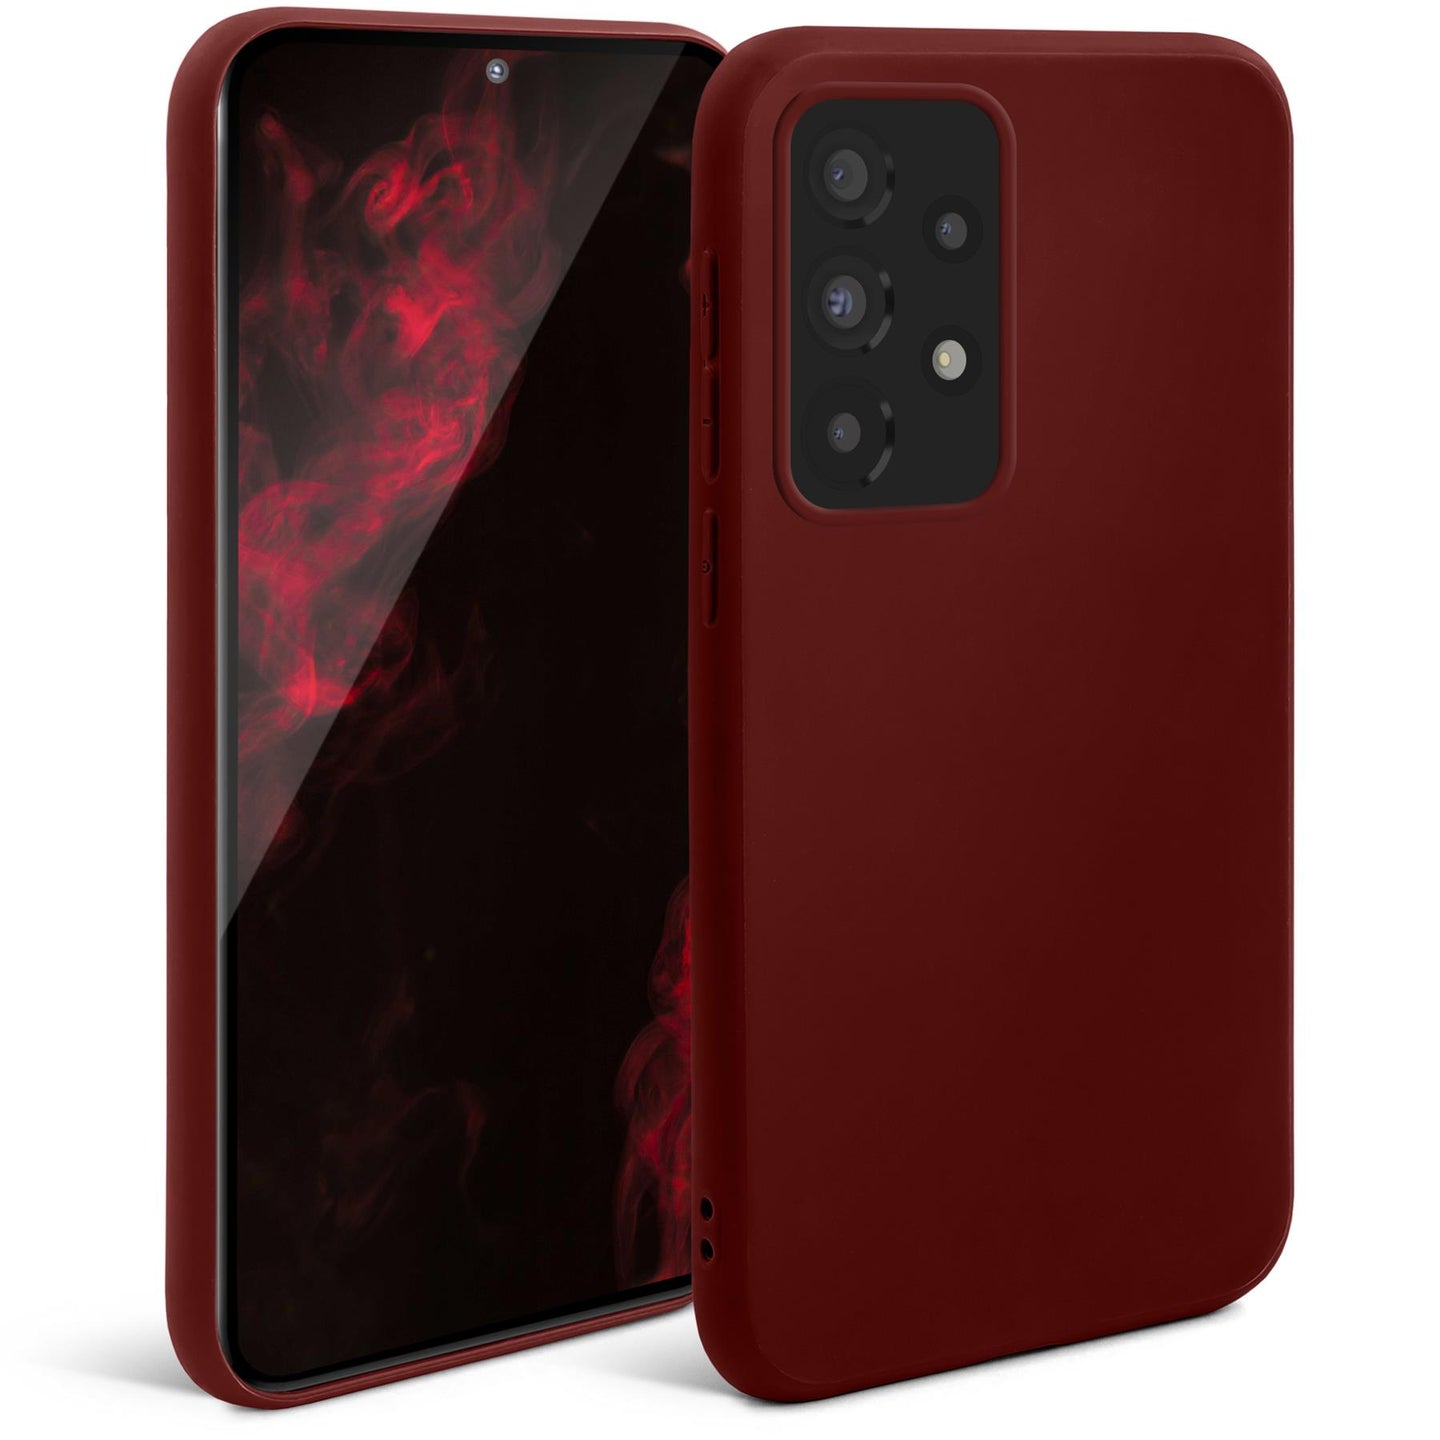 Moozy Minimalist Series Silicone Case for Samsung A53 5G, Wine Red - Matte Finish Lightweight Mobile Phone Case Slim Soft Protective TPU Cover with Matte Surface